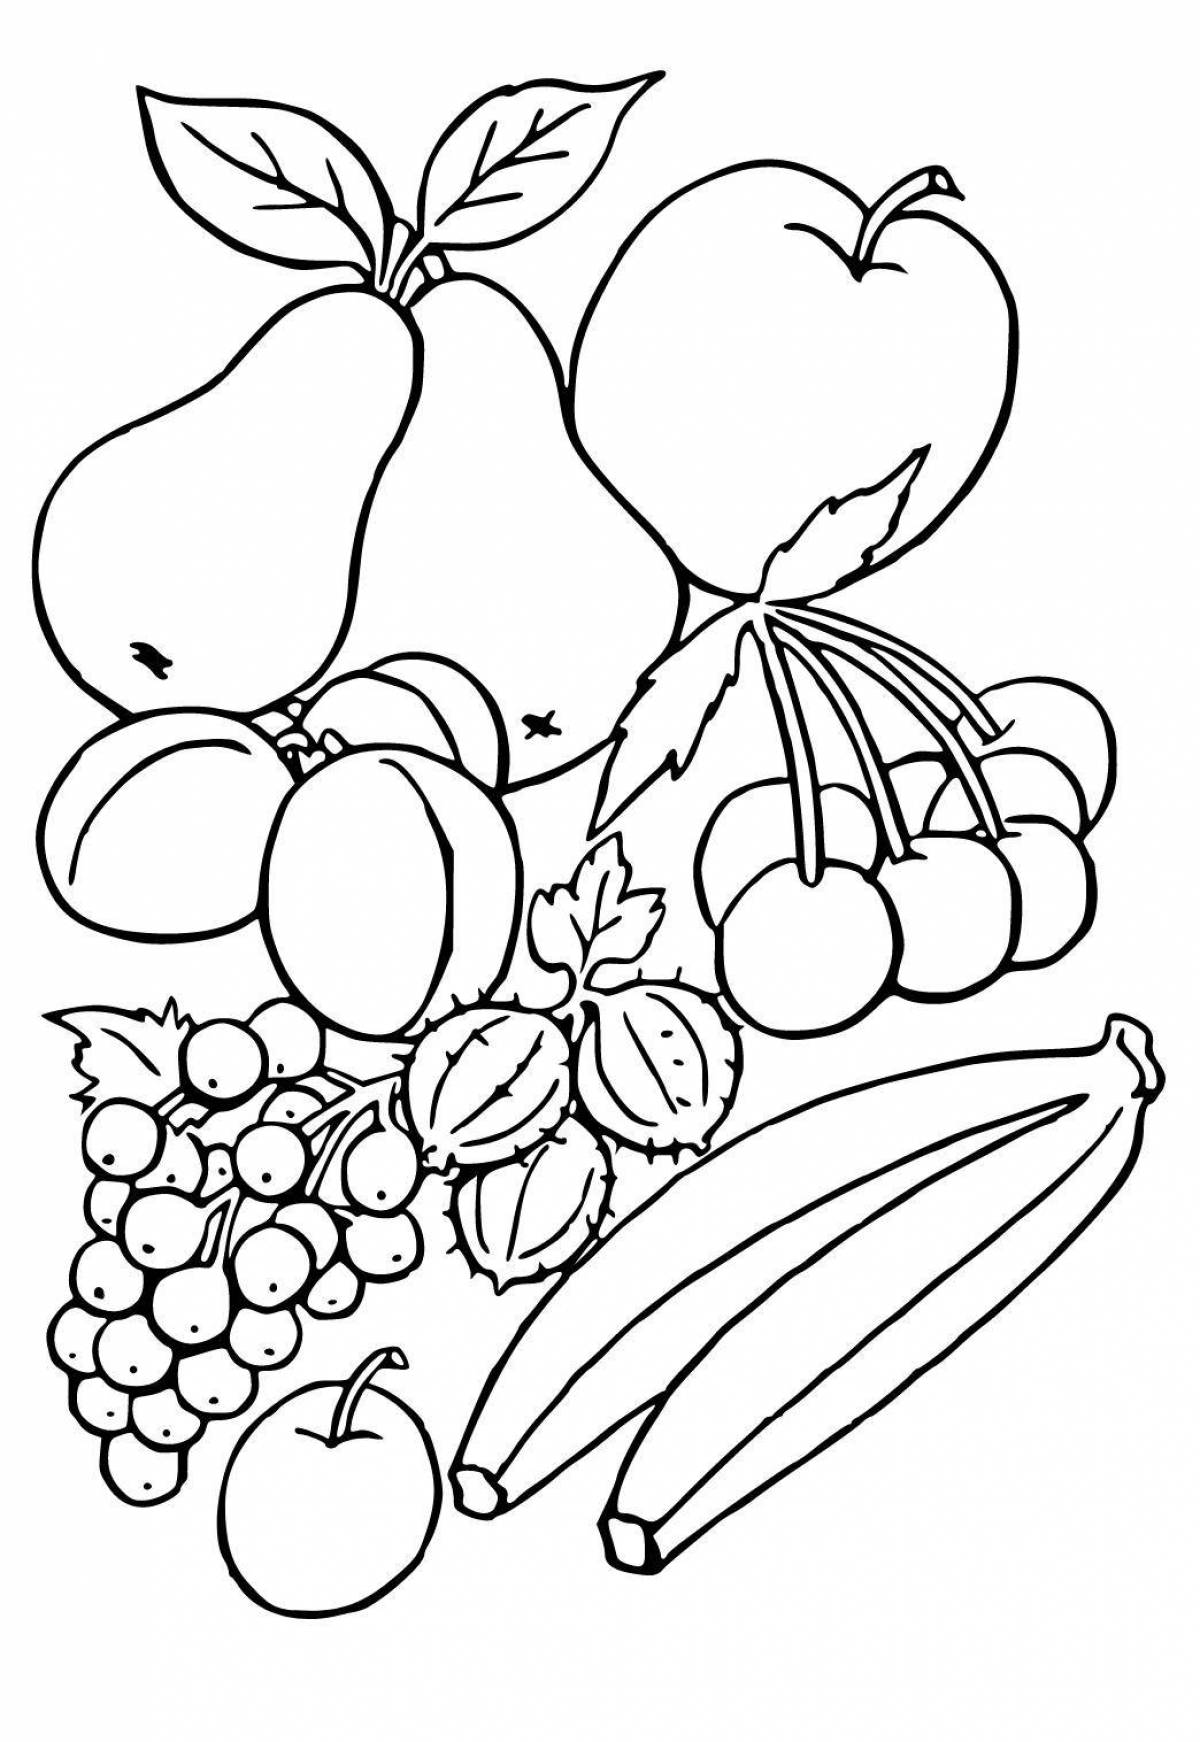 Glorious fruits coloring book for 5-6 year olds